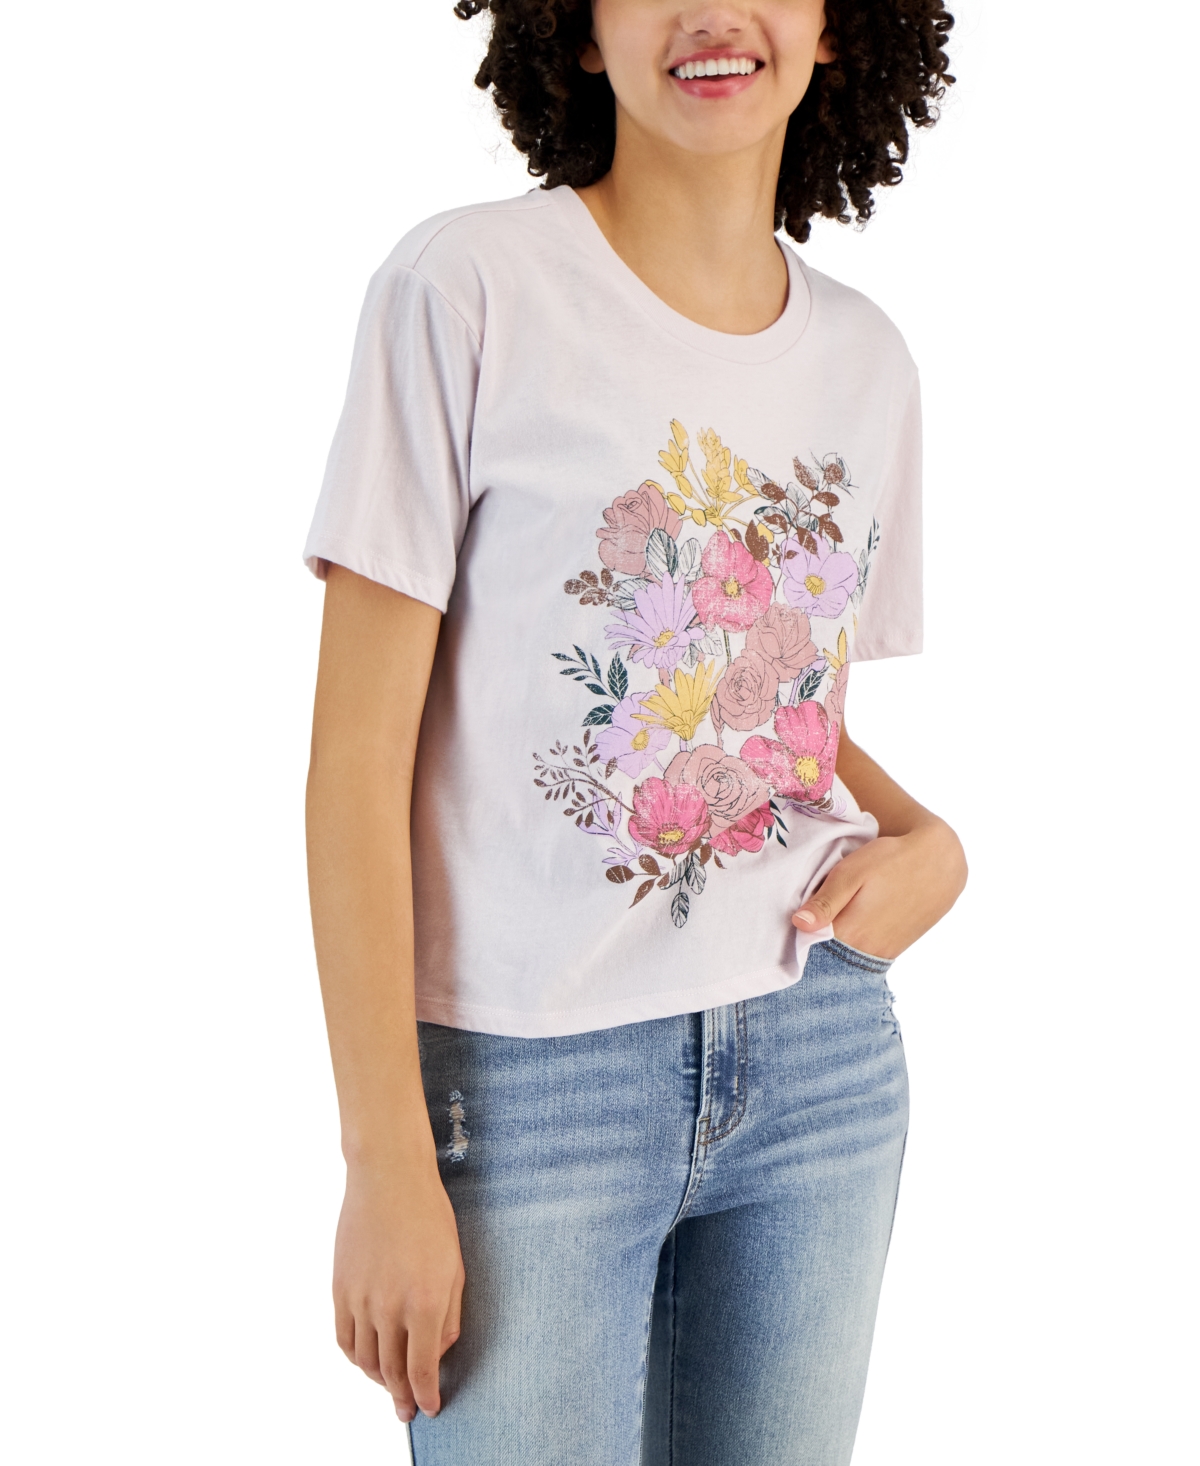 Juniors' Short-Sleeve Floral Graphic T-Shirt - Orchid Ice